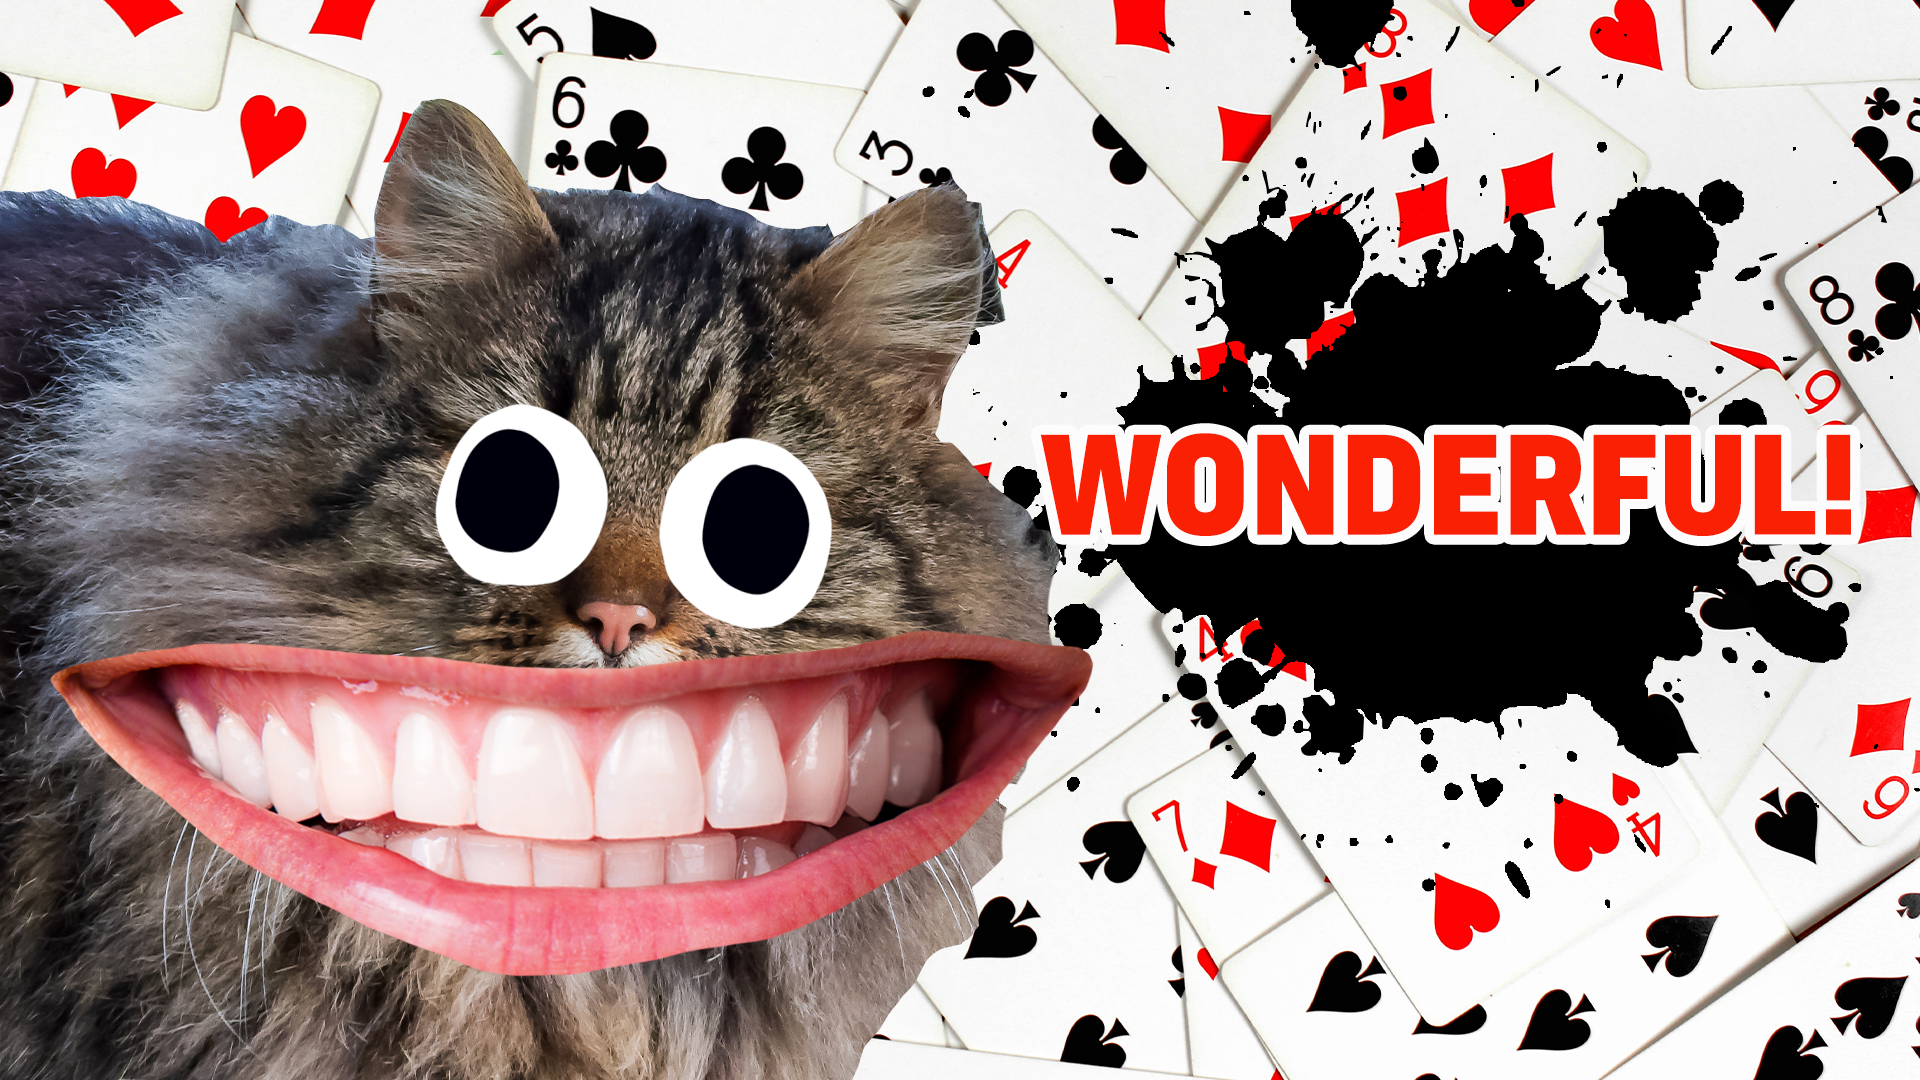 Wonderful! You got 100%, and Alice is seriously impressed! In fact, all of Wonderland is! Congrats!